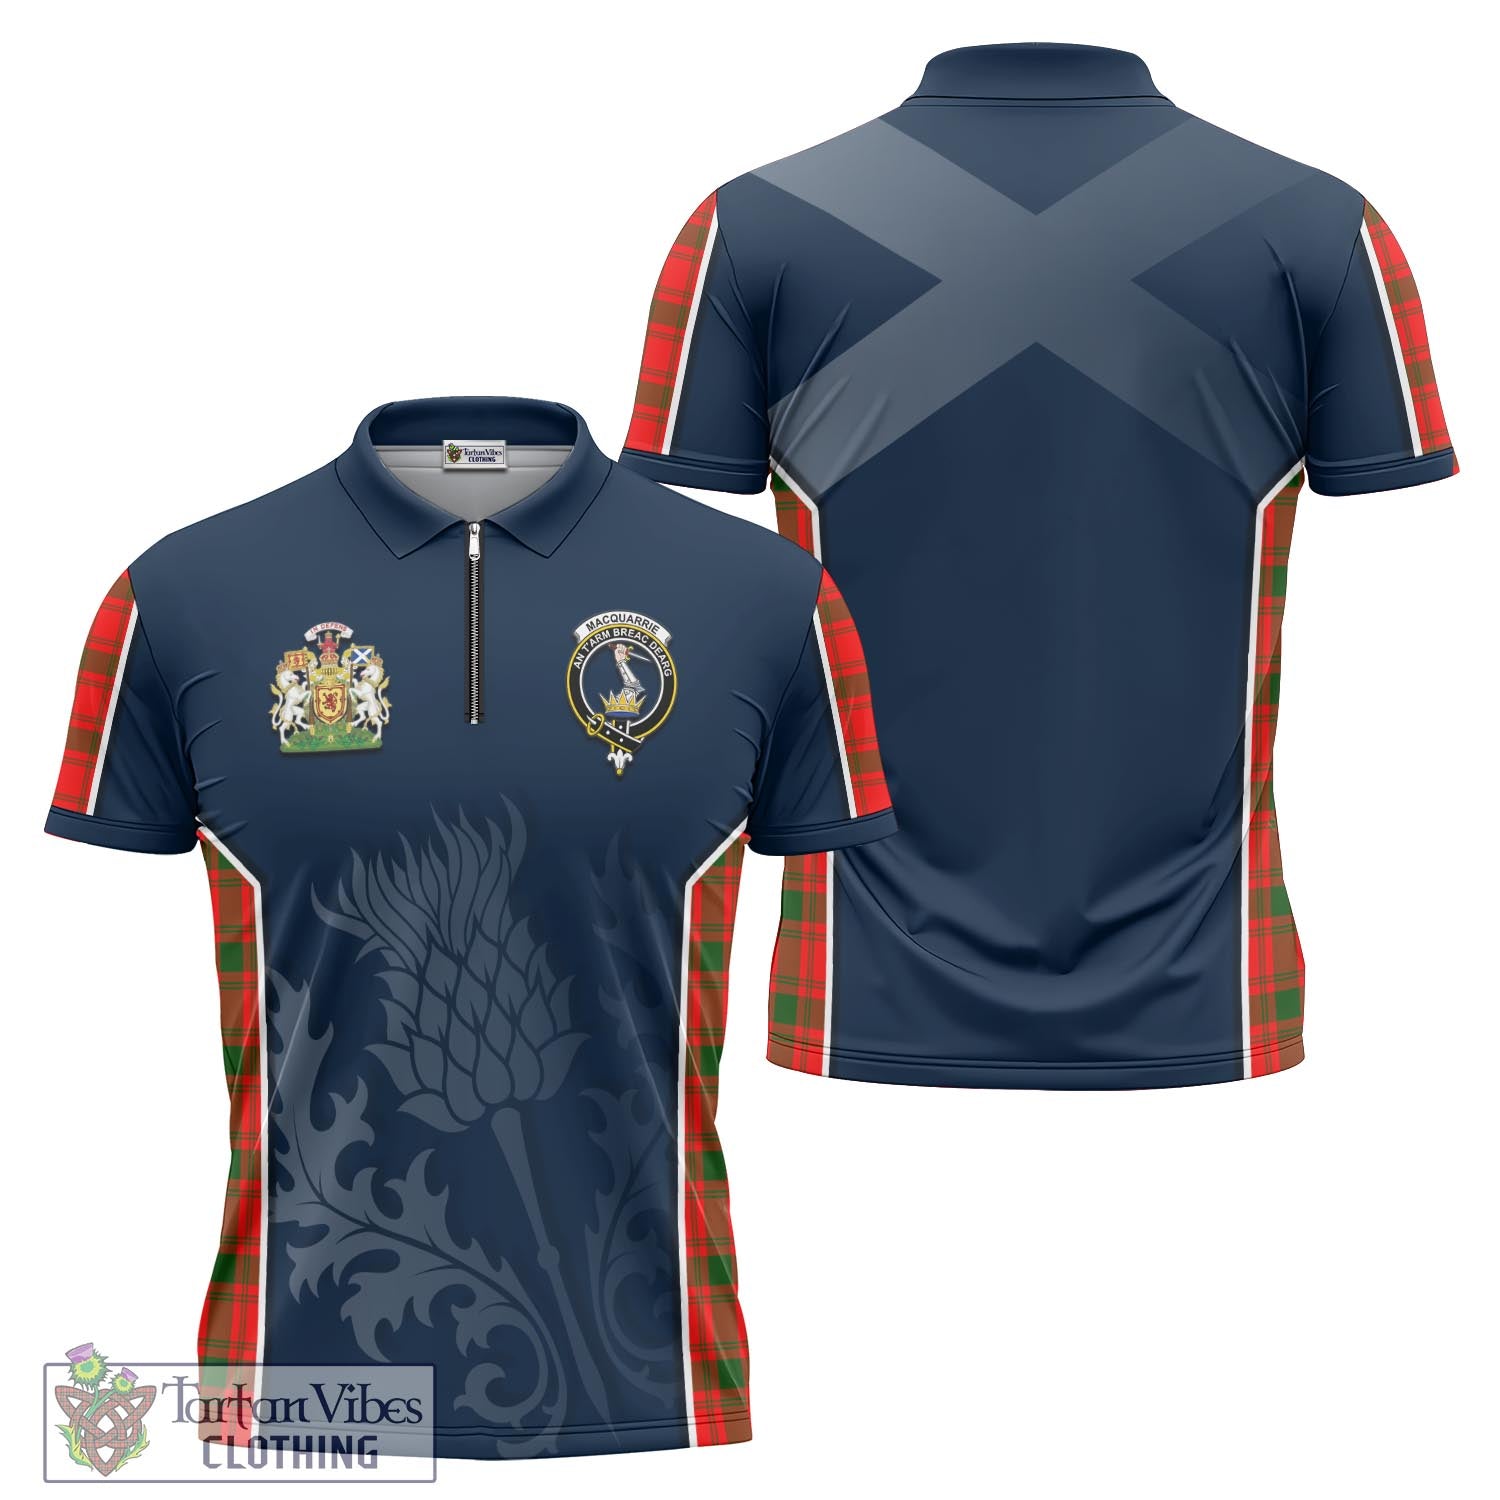 Tartan Vibes Clothing MacQuarrie Modern Tartan Zipper Polo Shirt with Family Crest and Scottish Thistle Vibes Sport Style